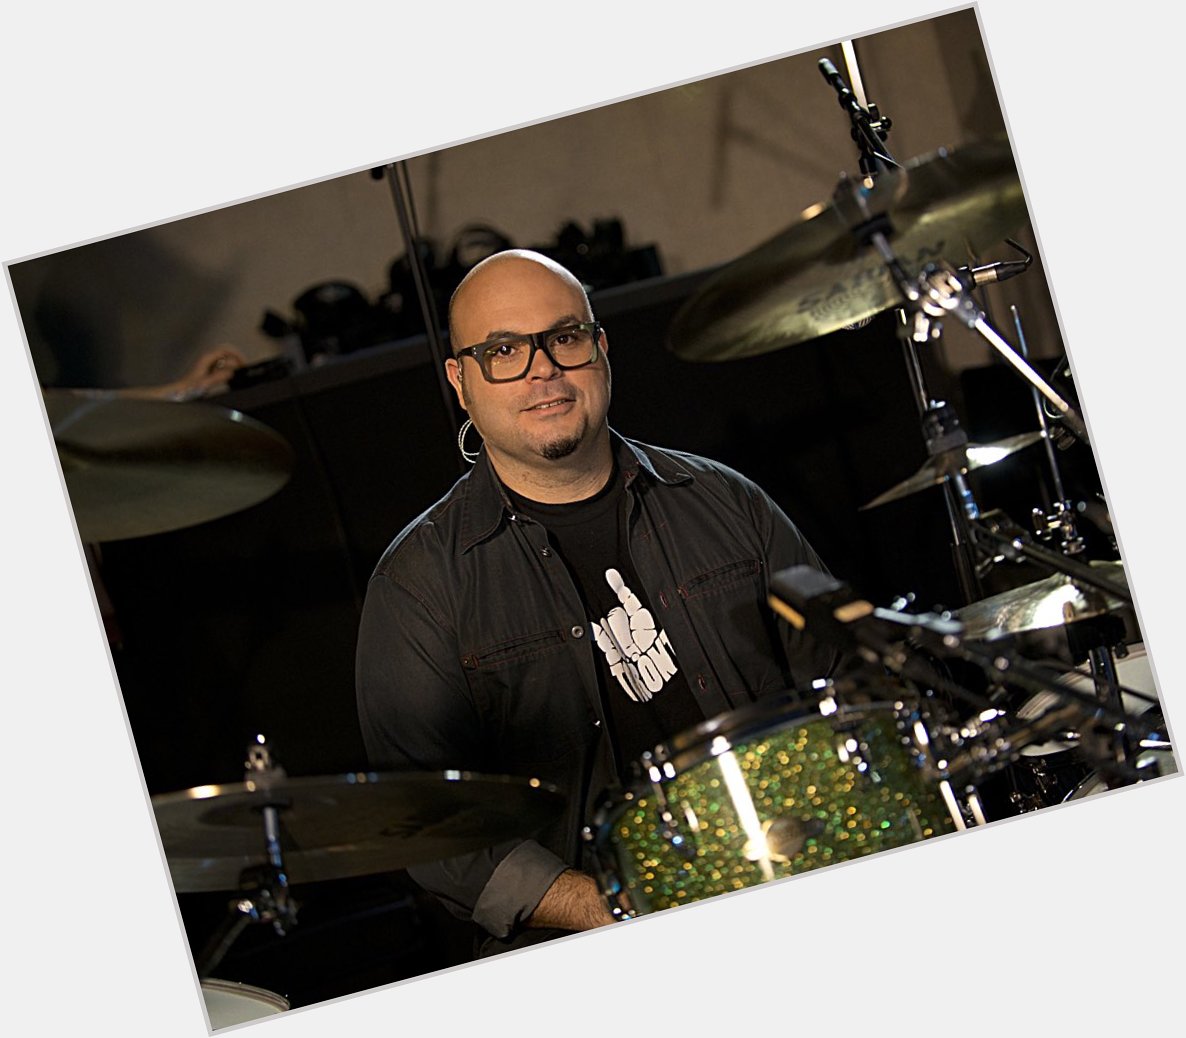 Happy 54th Birthday to Tyler Stewart! The drummer for the Canadian music group Barenaked Ladies. 